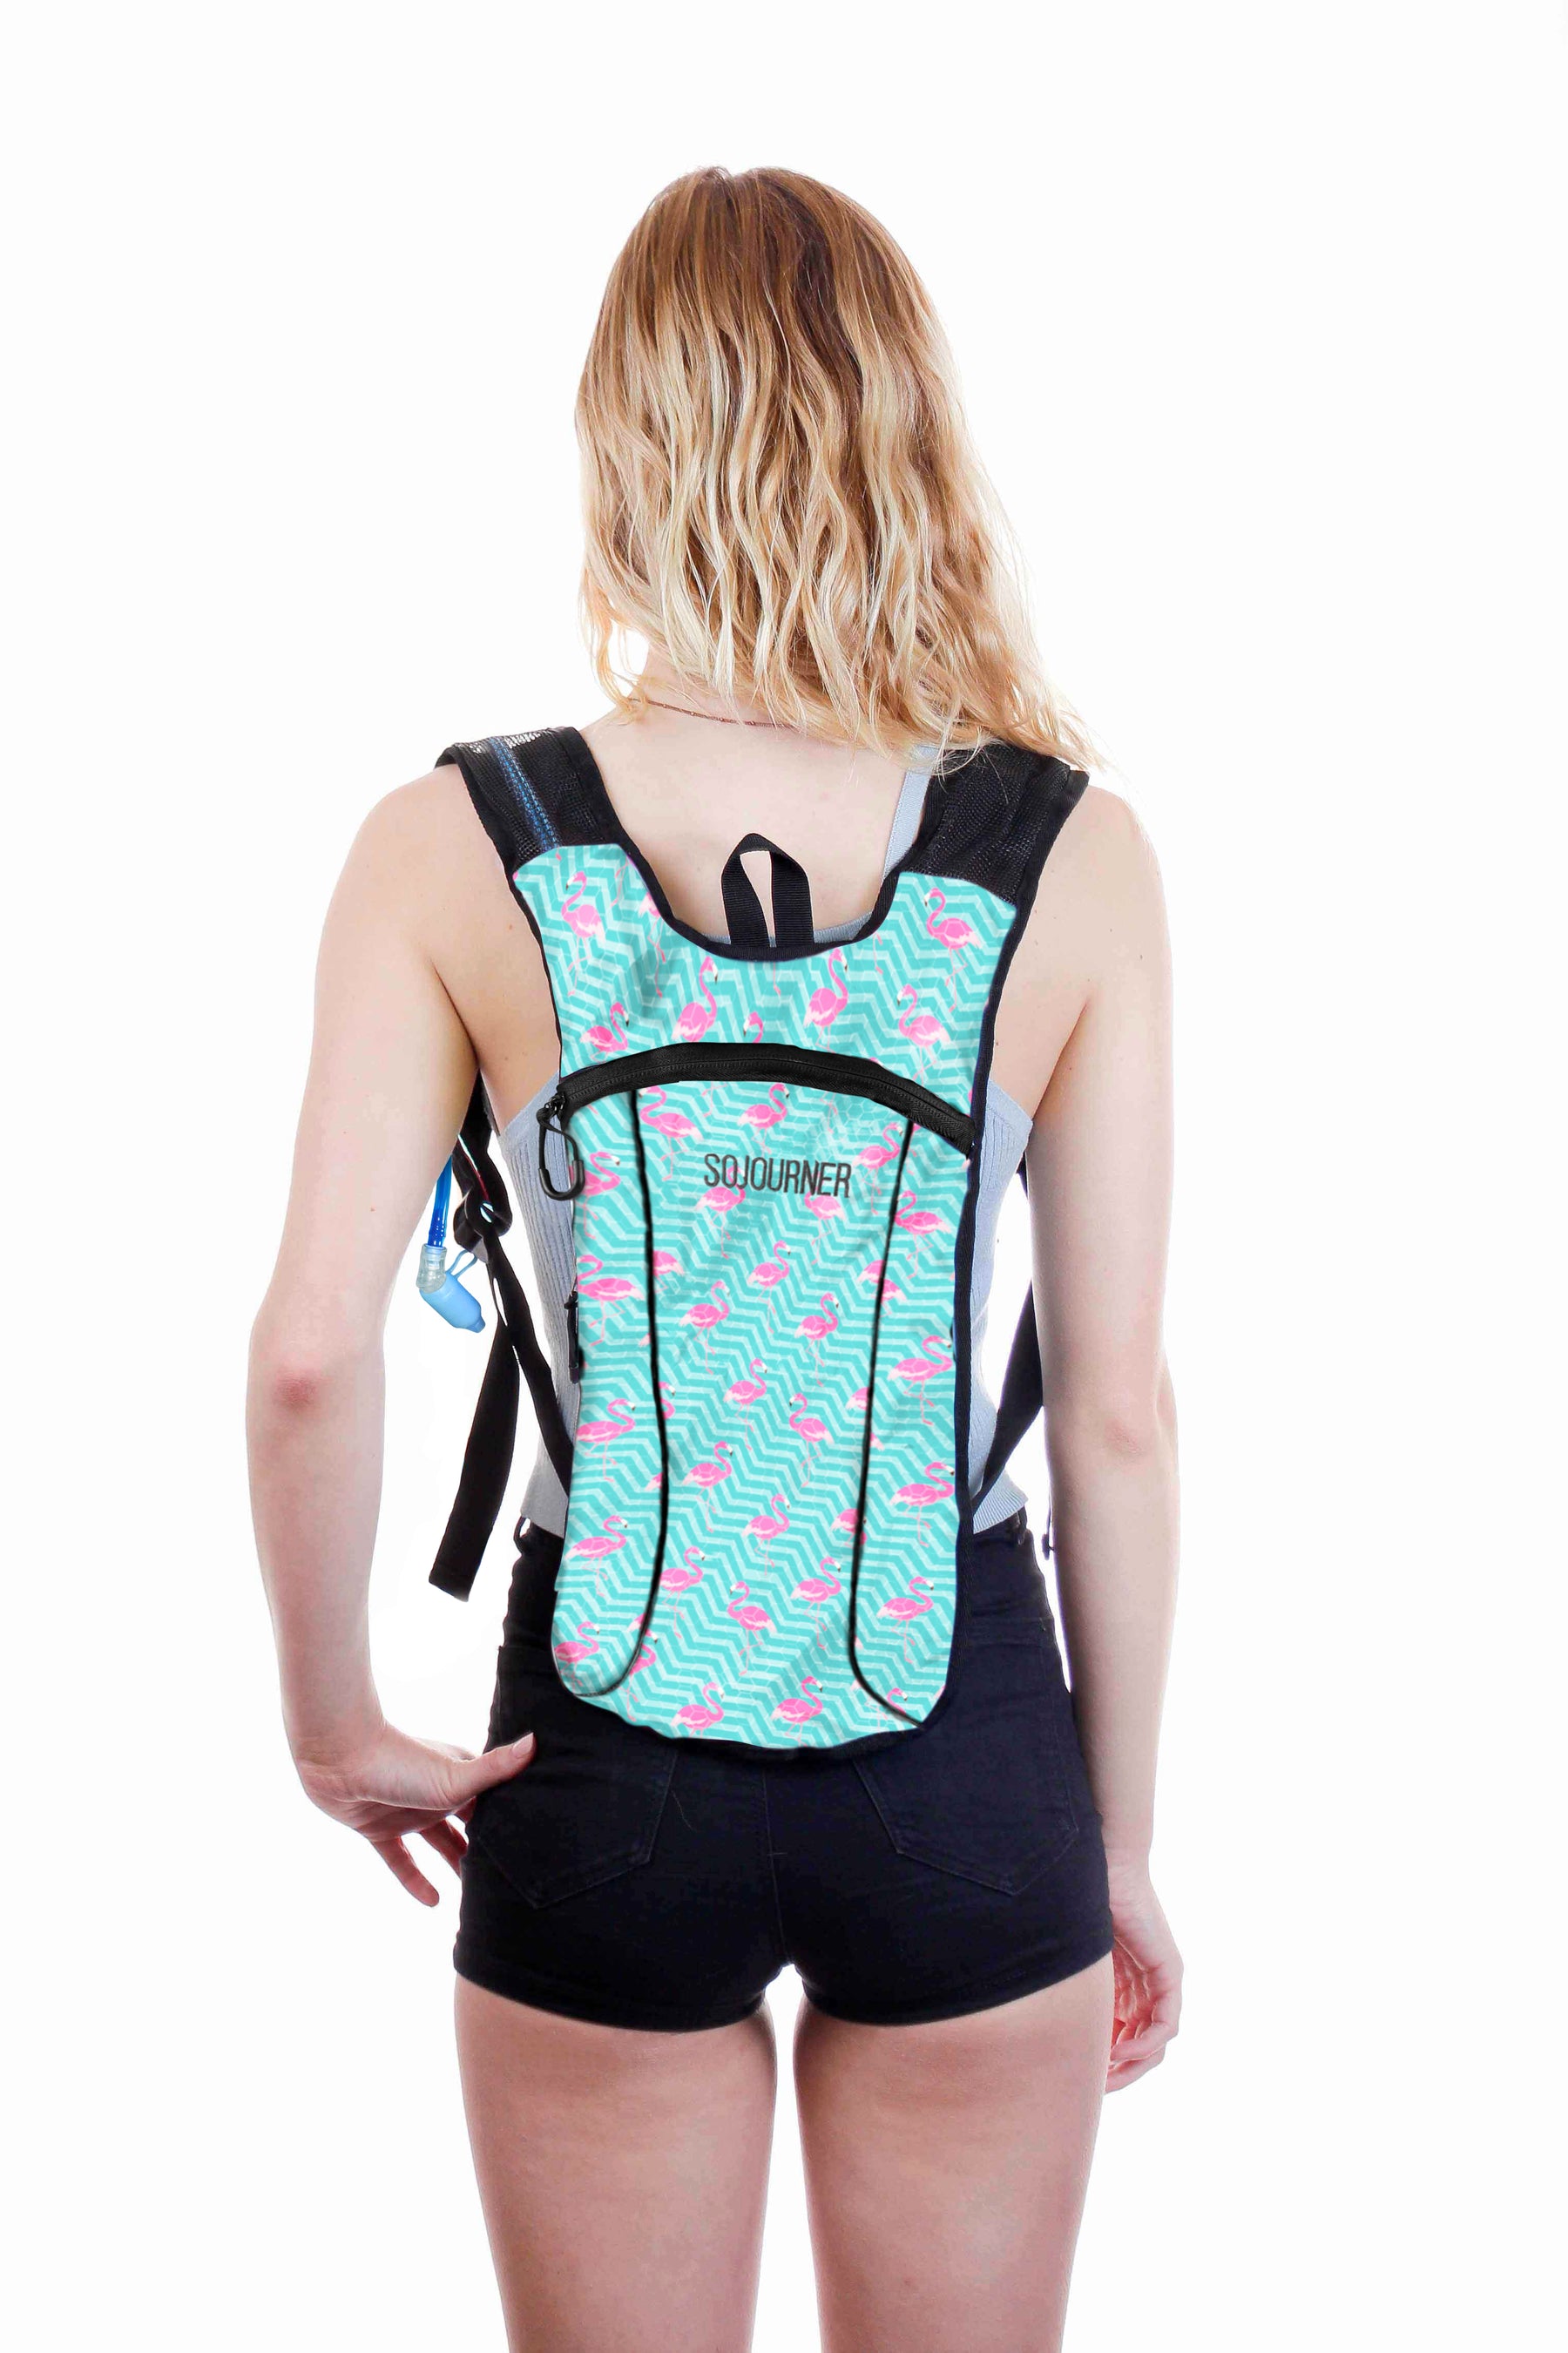 Hydration Pack Backpack - 2L Water Bladder - Flamingo